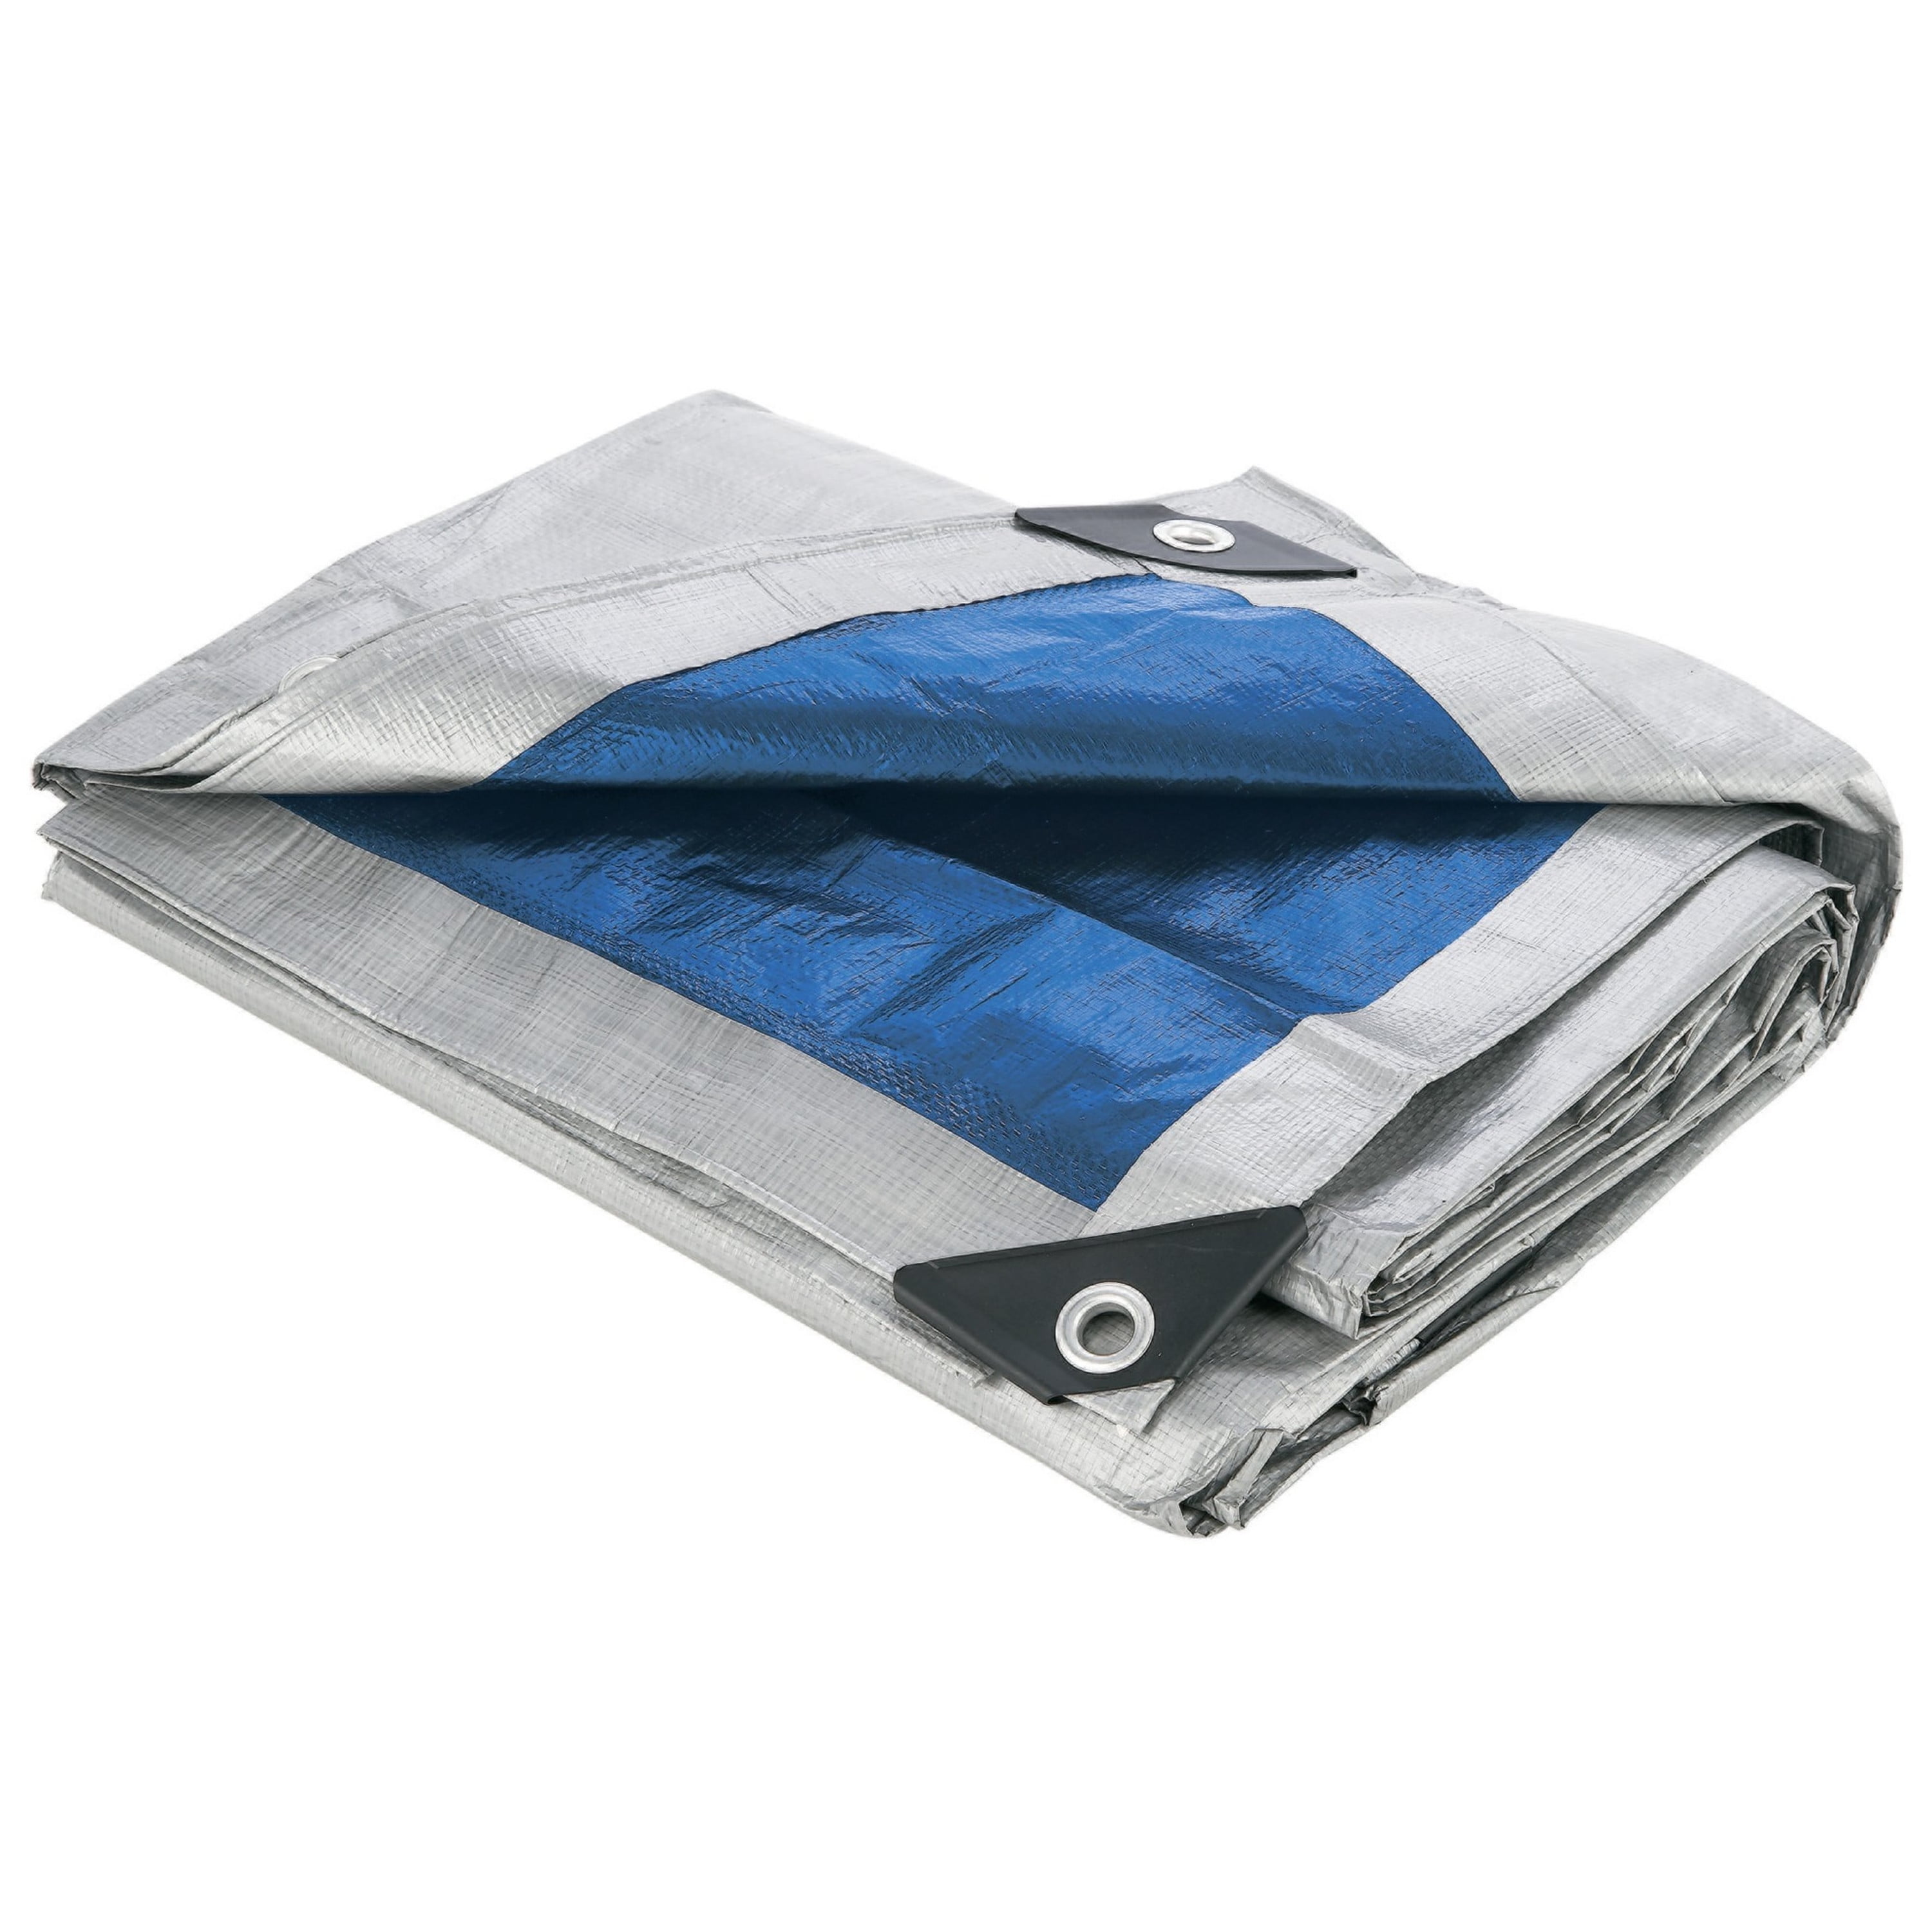 Details about   Heavy Duty Waterproof Tarpaulin Tarp Sheet Car Boat Camping Cover Travel Outdoor 